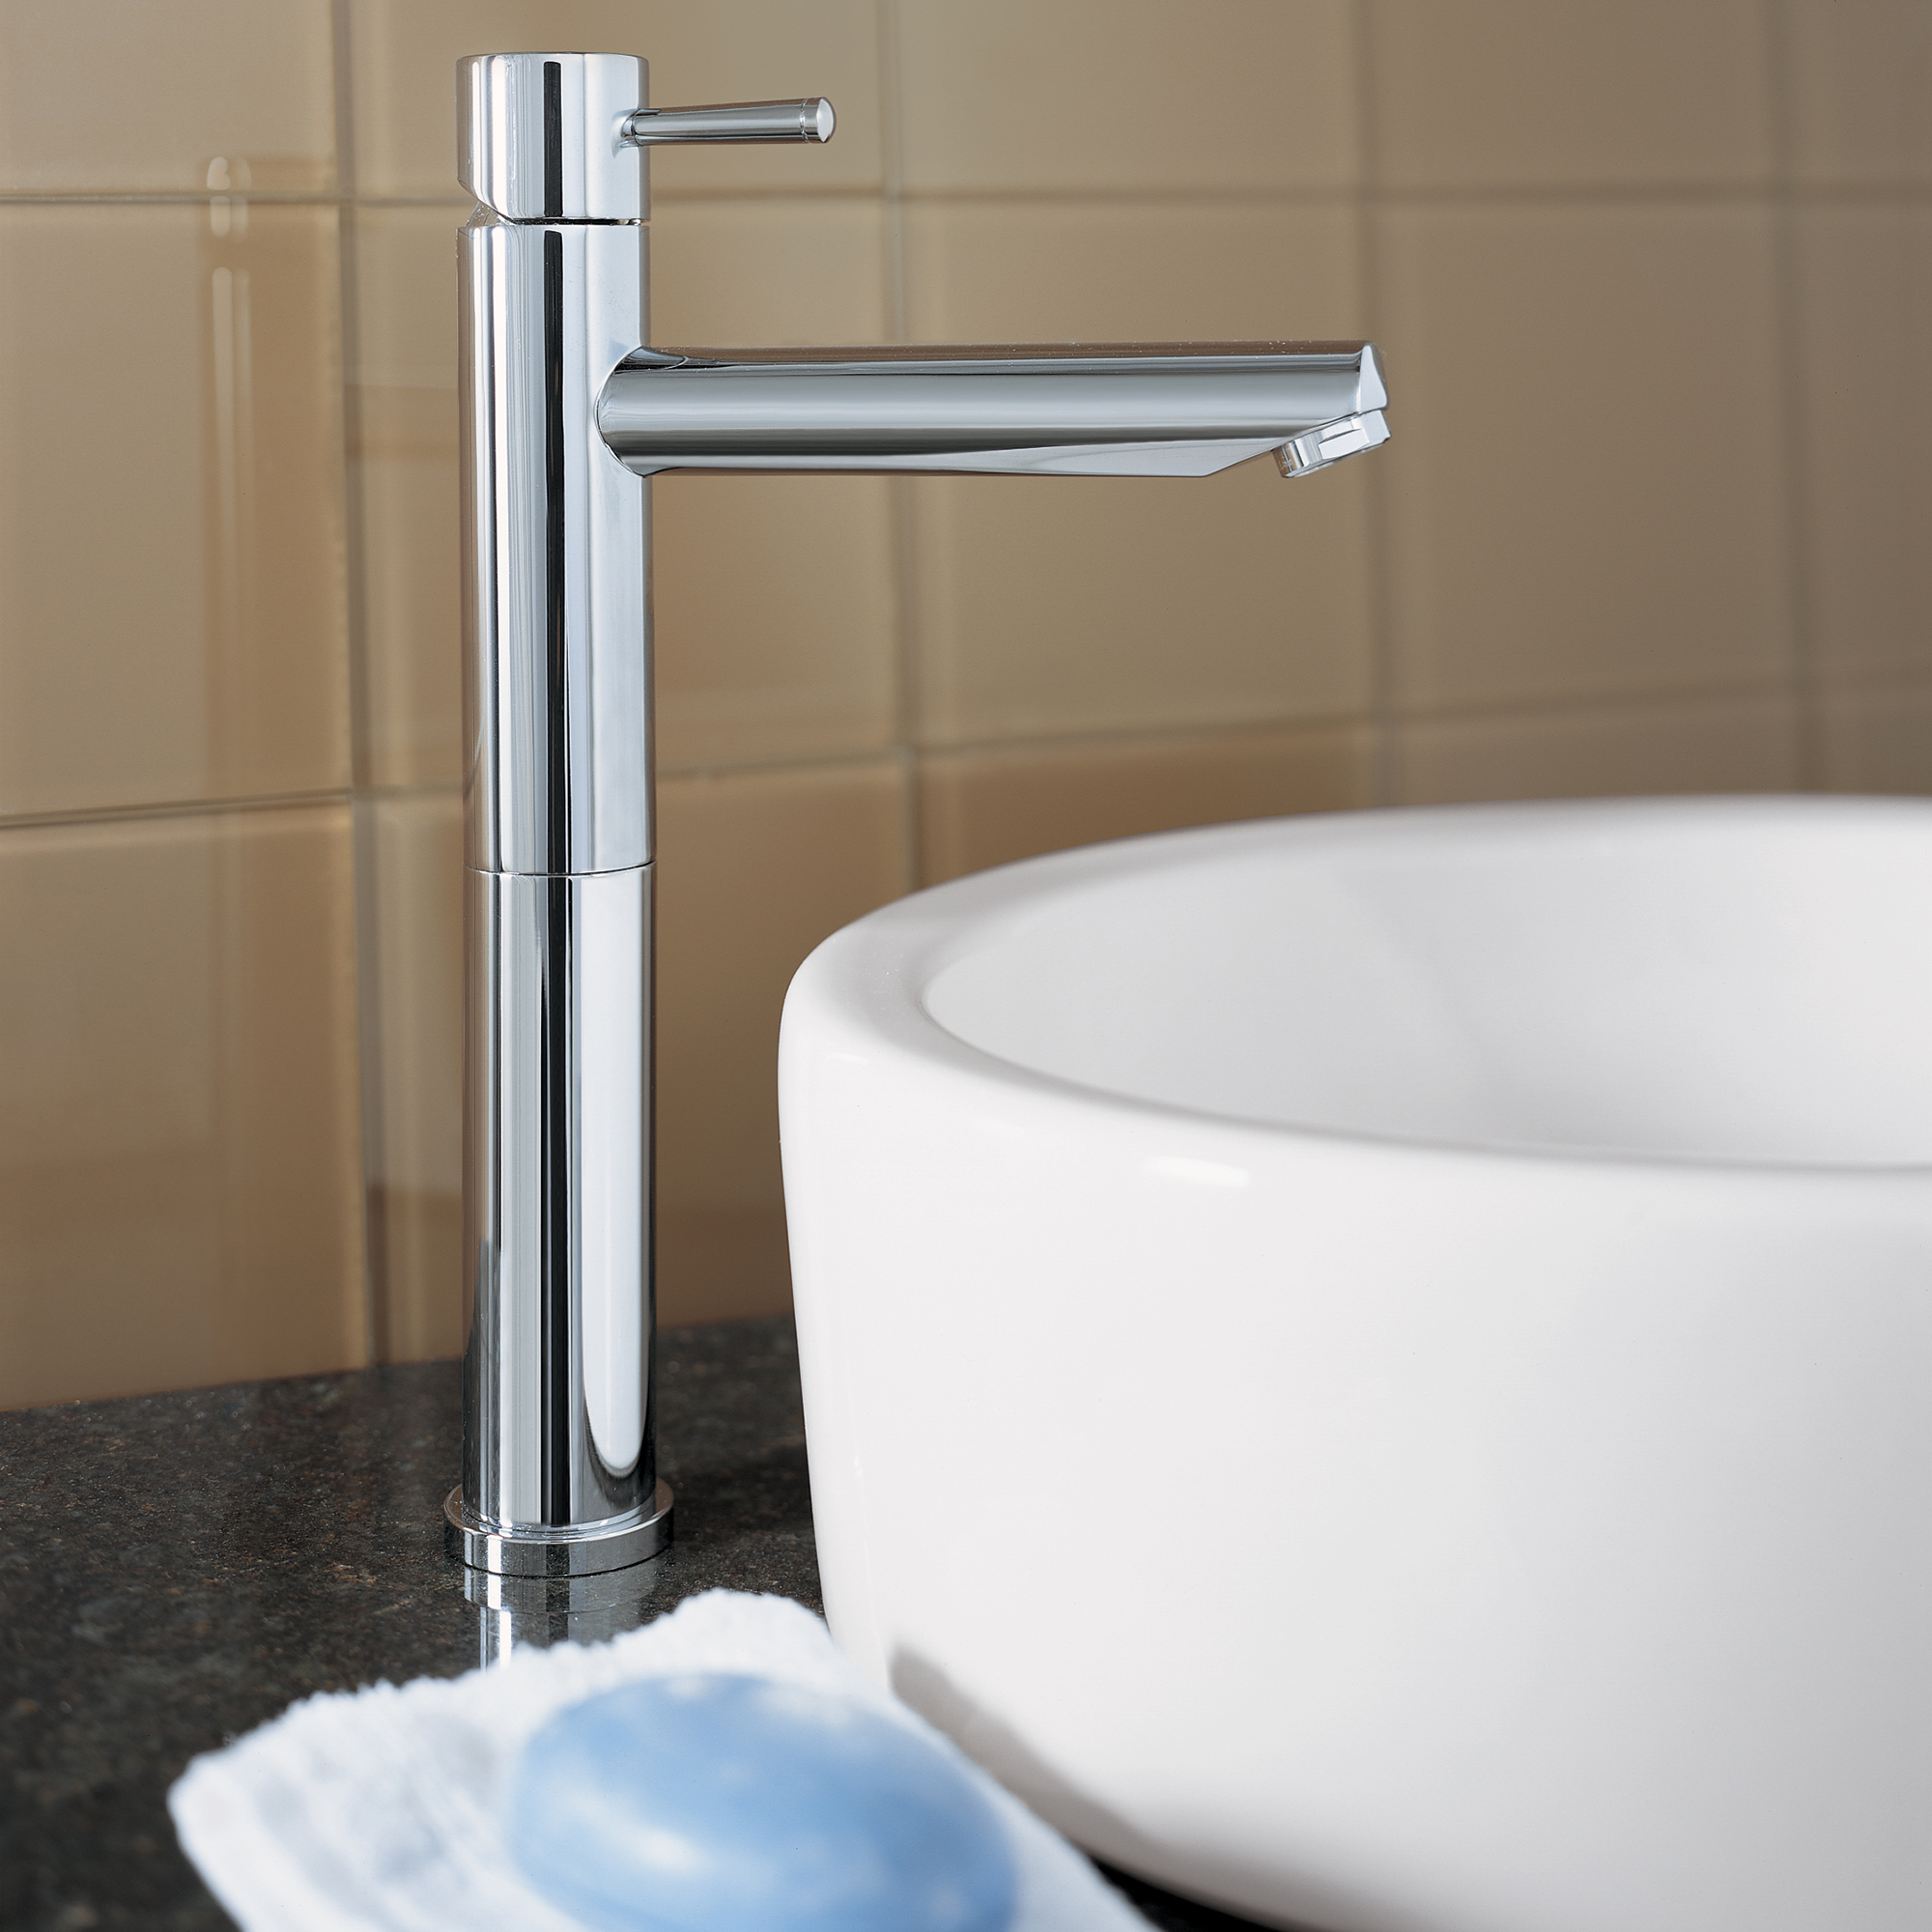 Serin® Single Hole Single-Handle Vessel Sink Faucet 1.2 gpm/4.5 L/min With Lever Handle